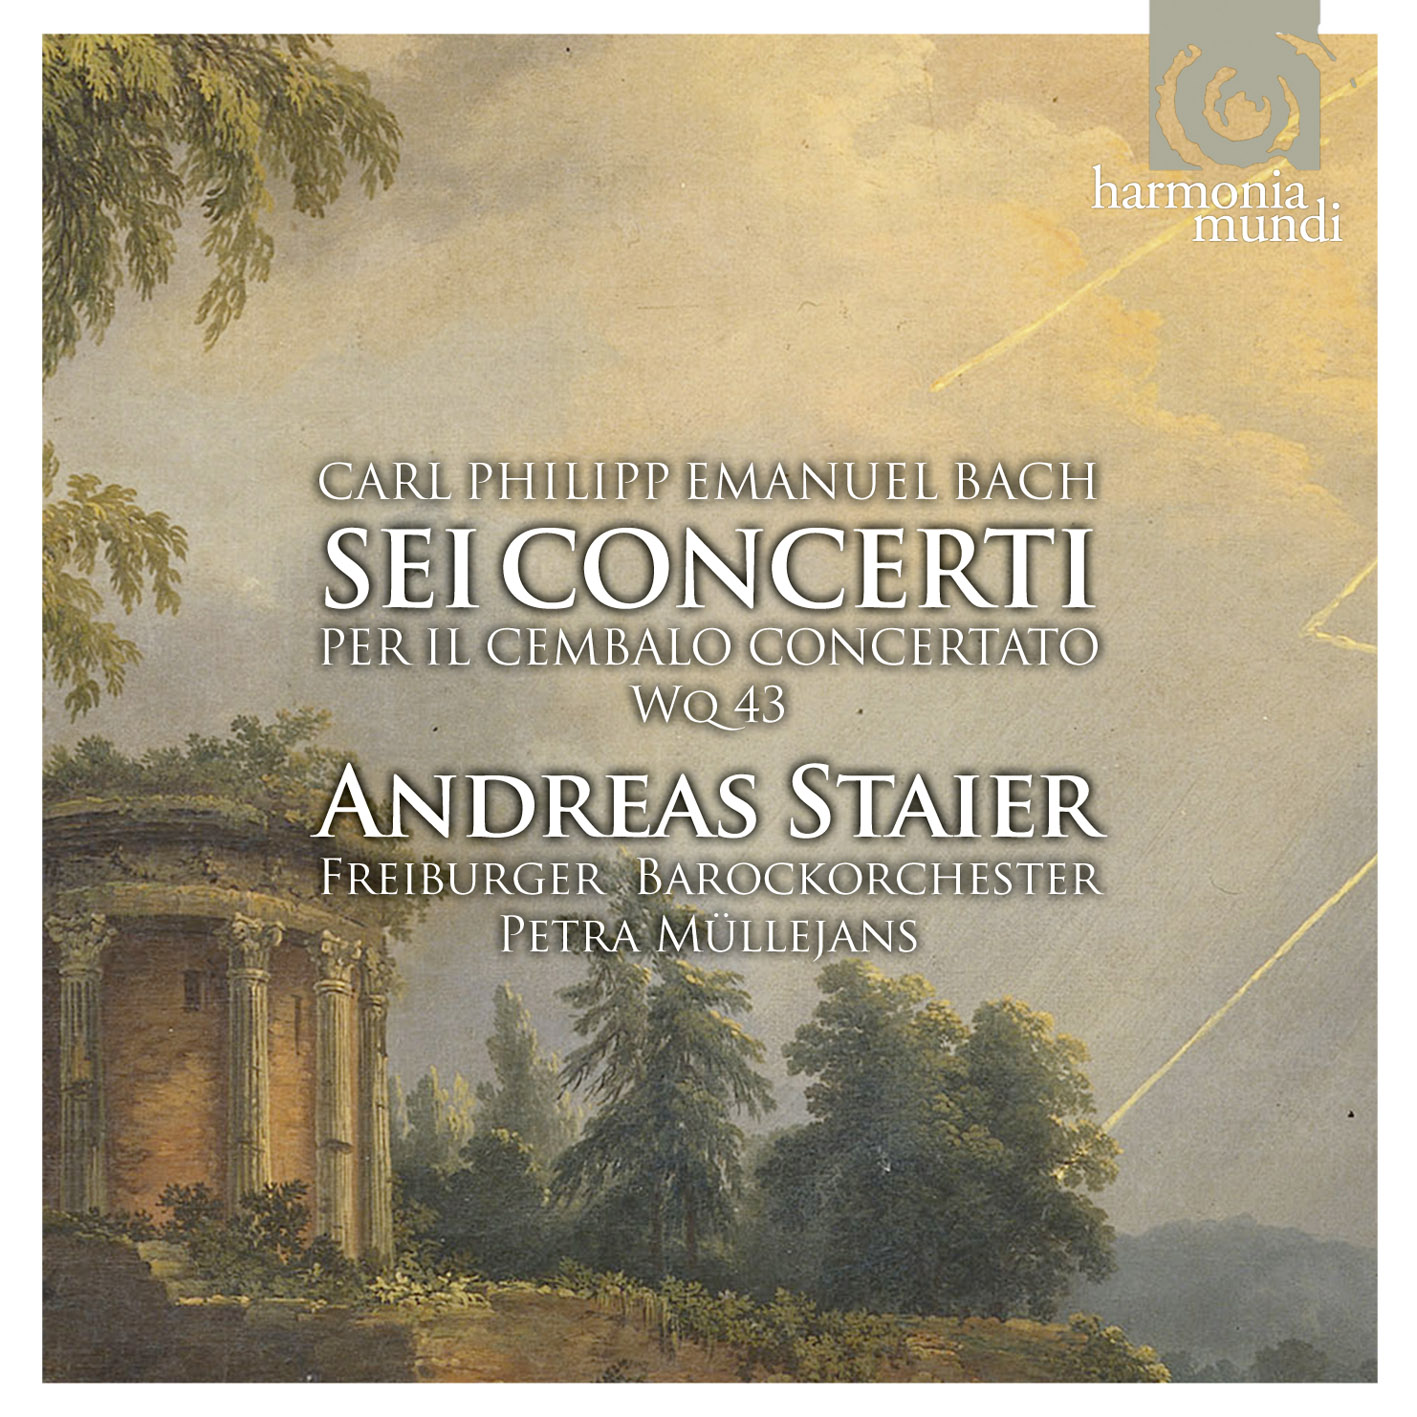 Andreas Staier - CPE Bach: The Keyboard Concertos Wq 43, Nos. 1-6 (2011) [FLAC 24bit/44,1kHz]